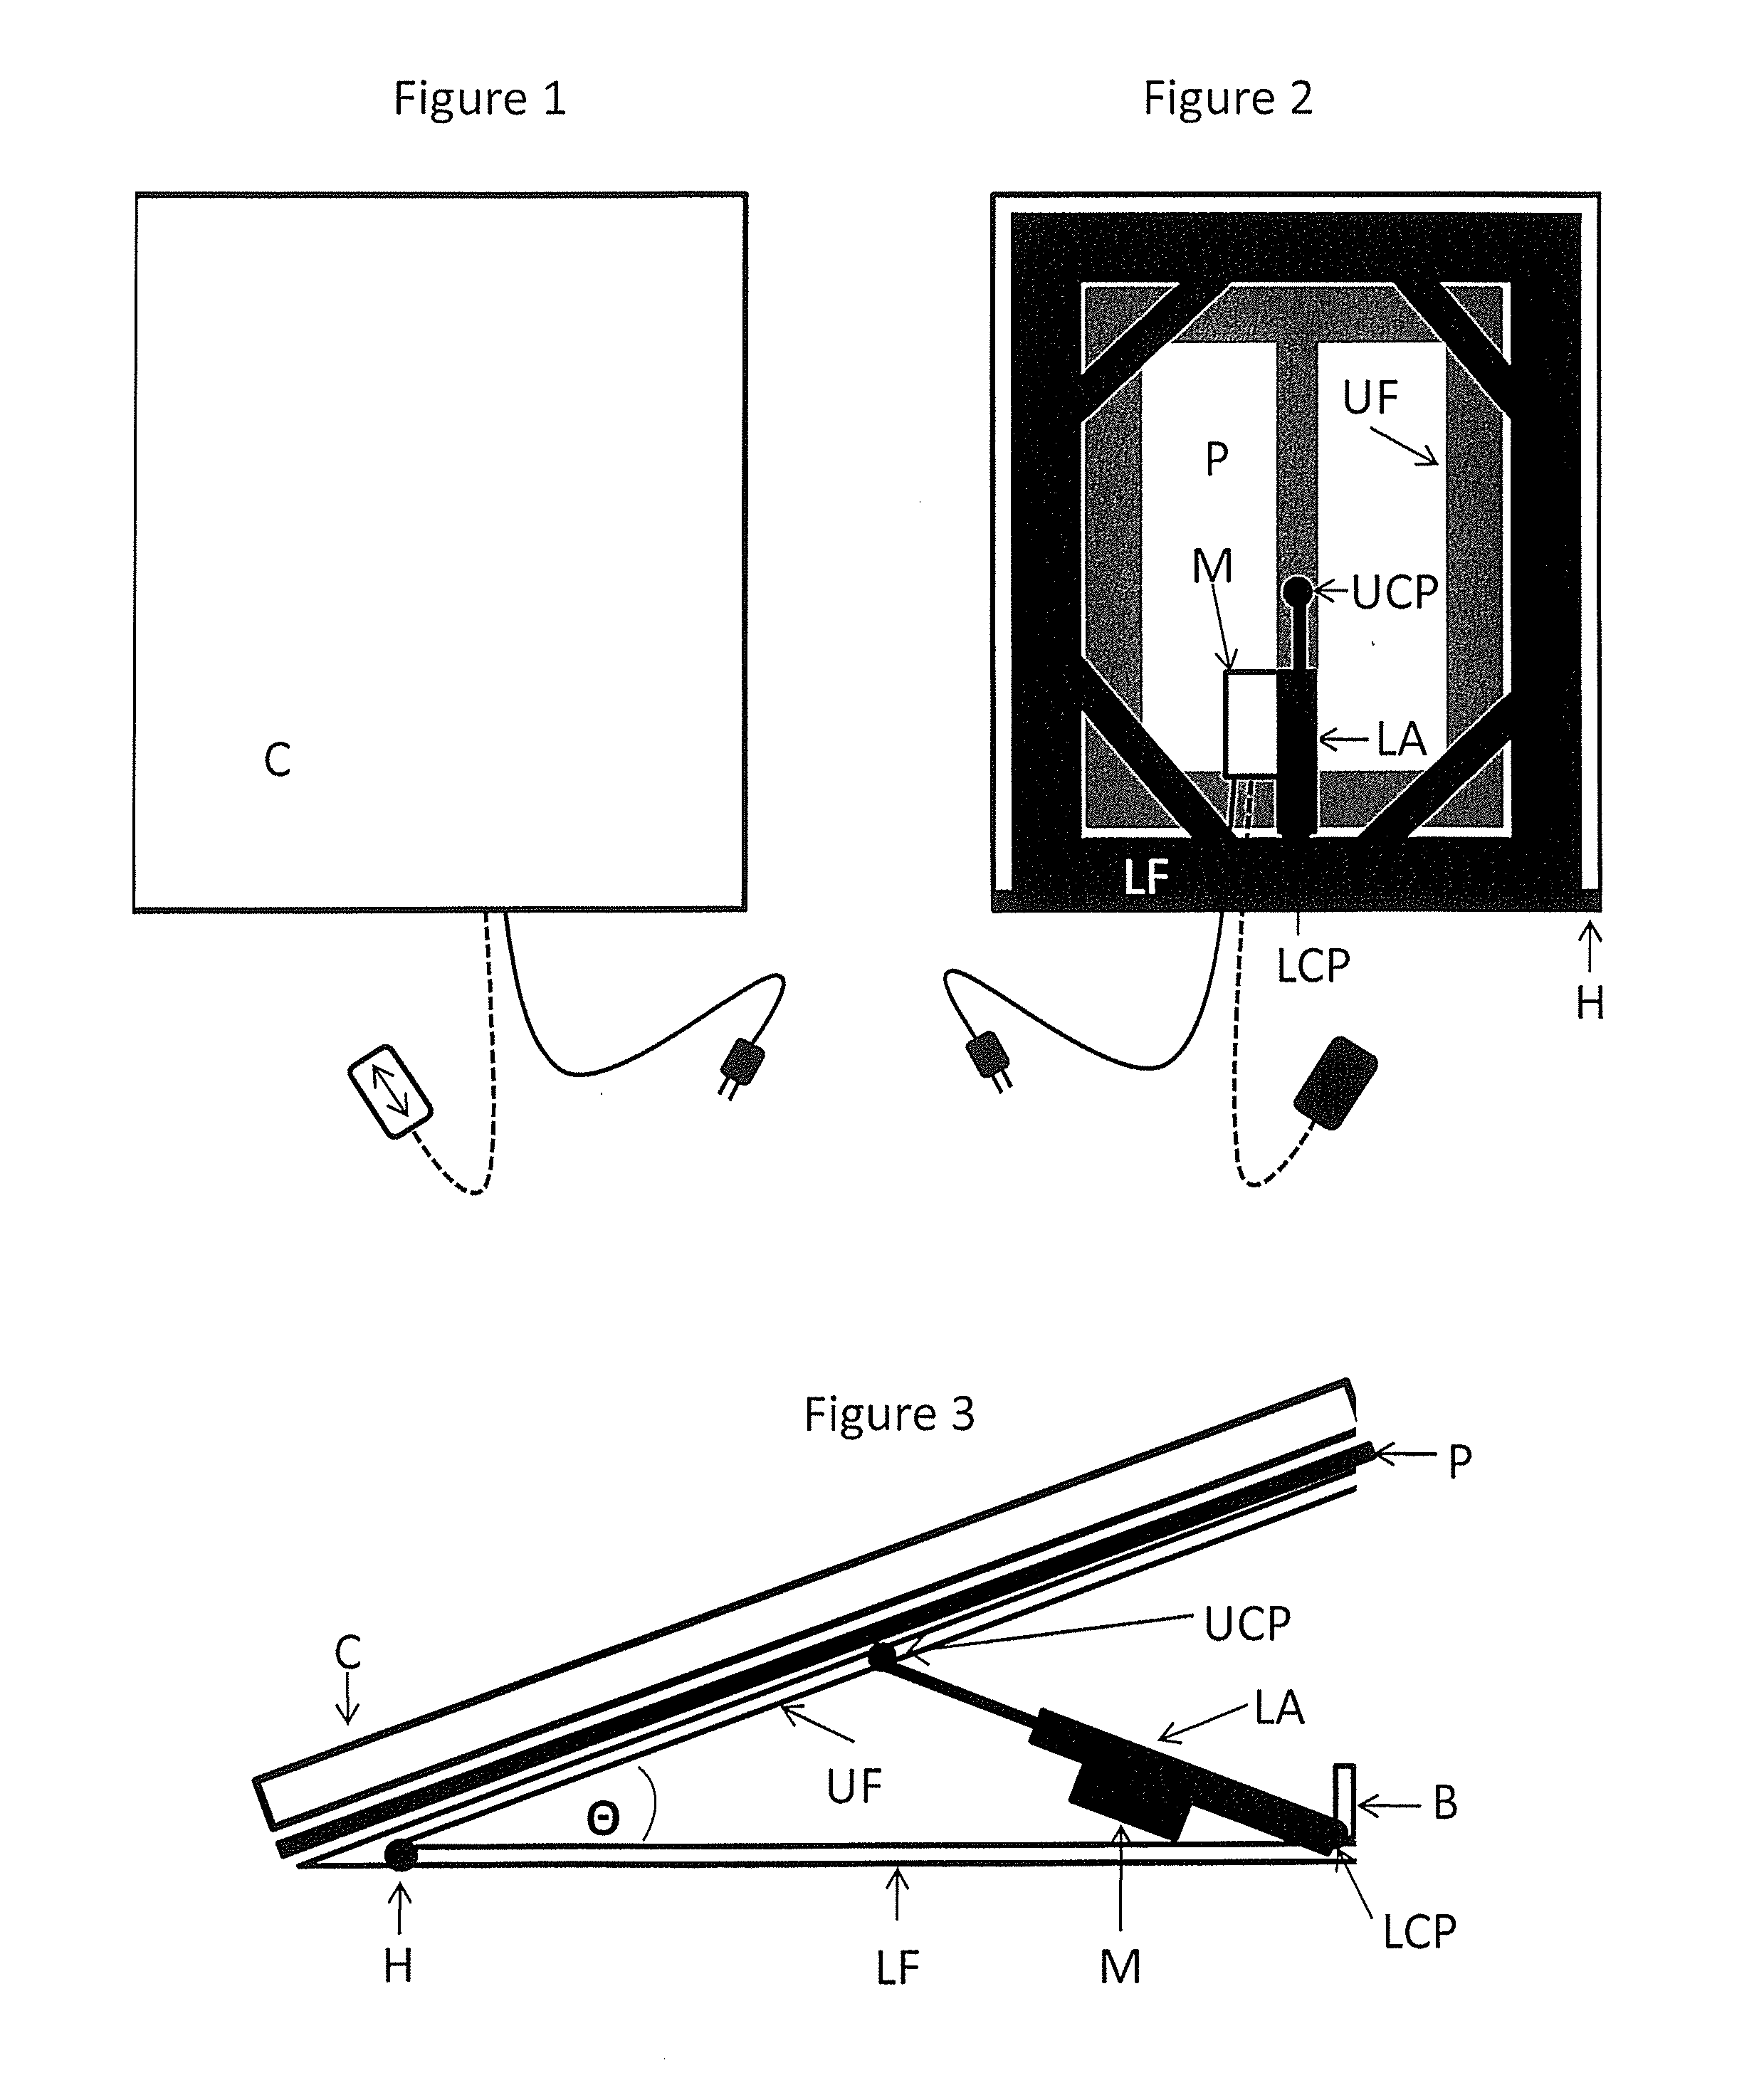 Surface mounted, motorized upper body lift assembly for alleviating discomfort while lying down